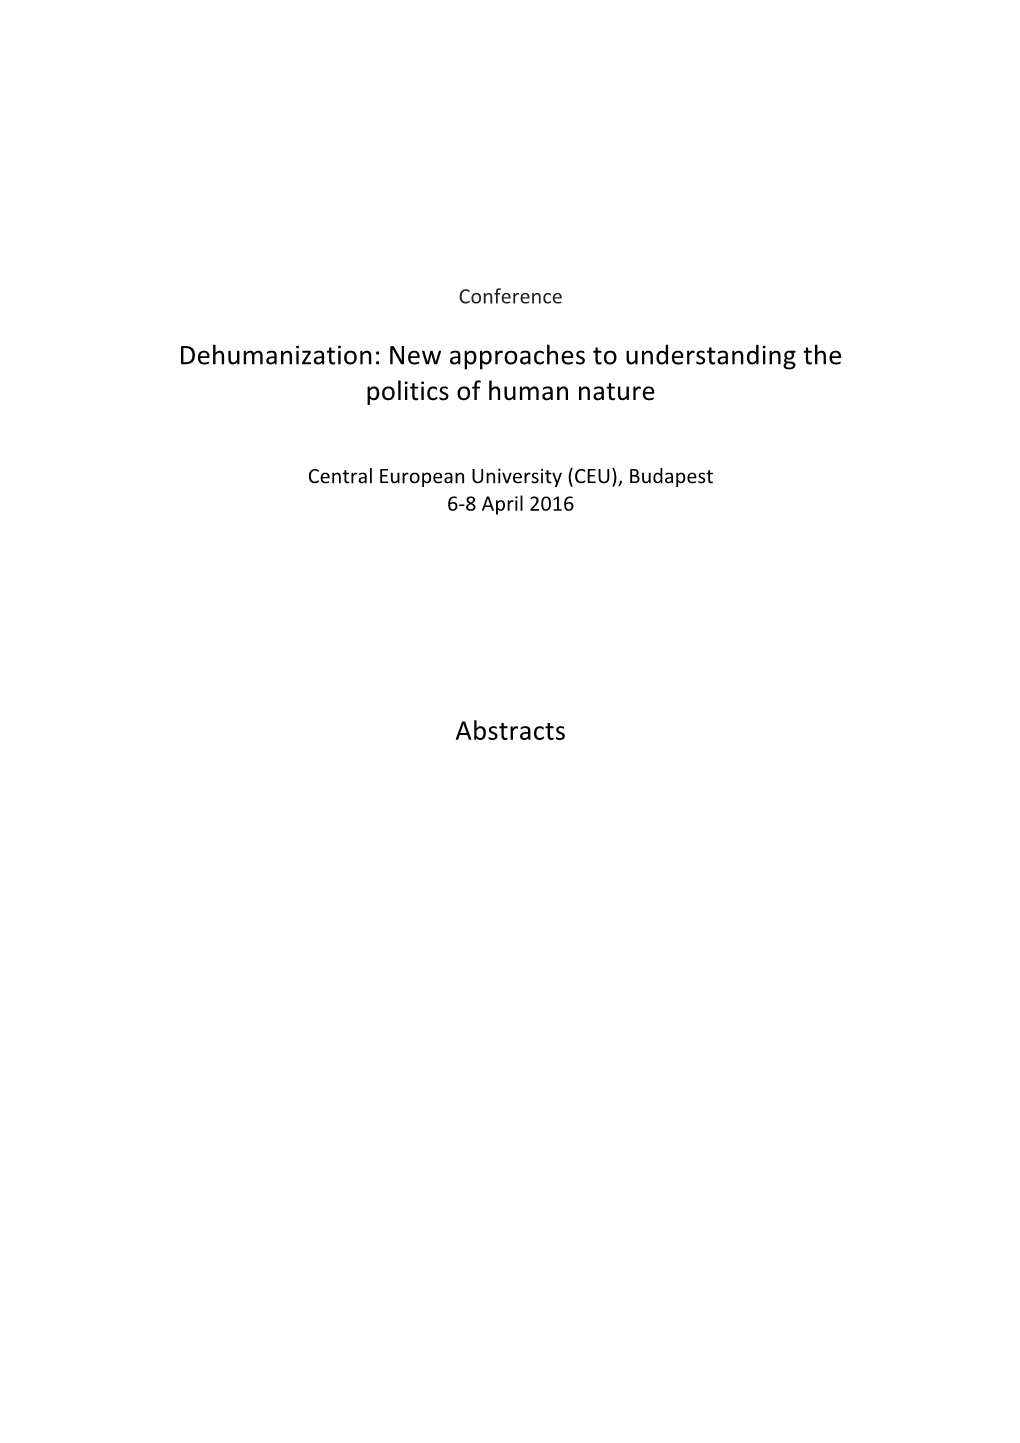 Dehumanization: New Approaches to Understanding the Politics of Human Nature